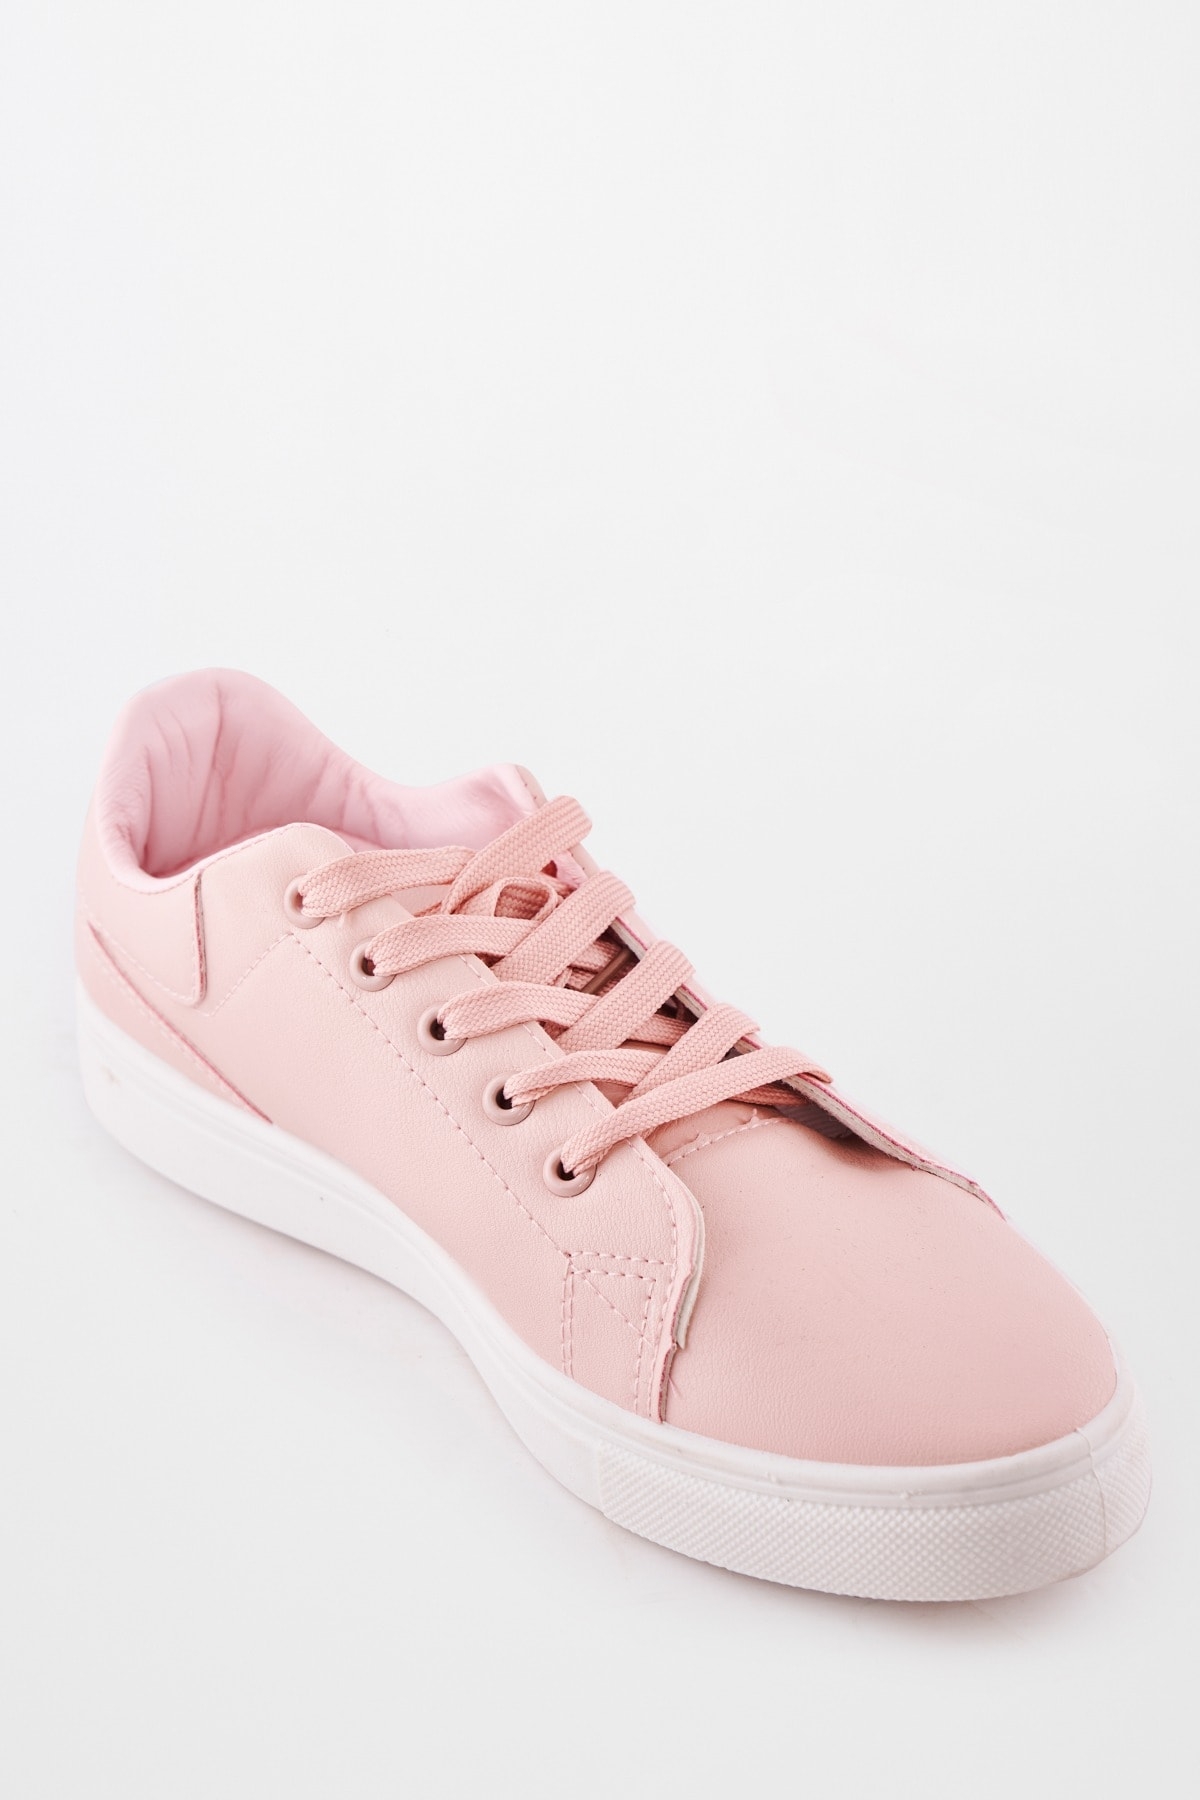 AND | Pink Sneakers 2